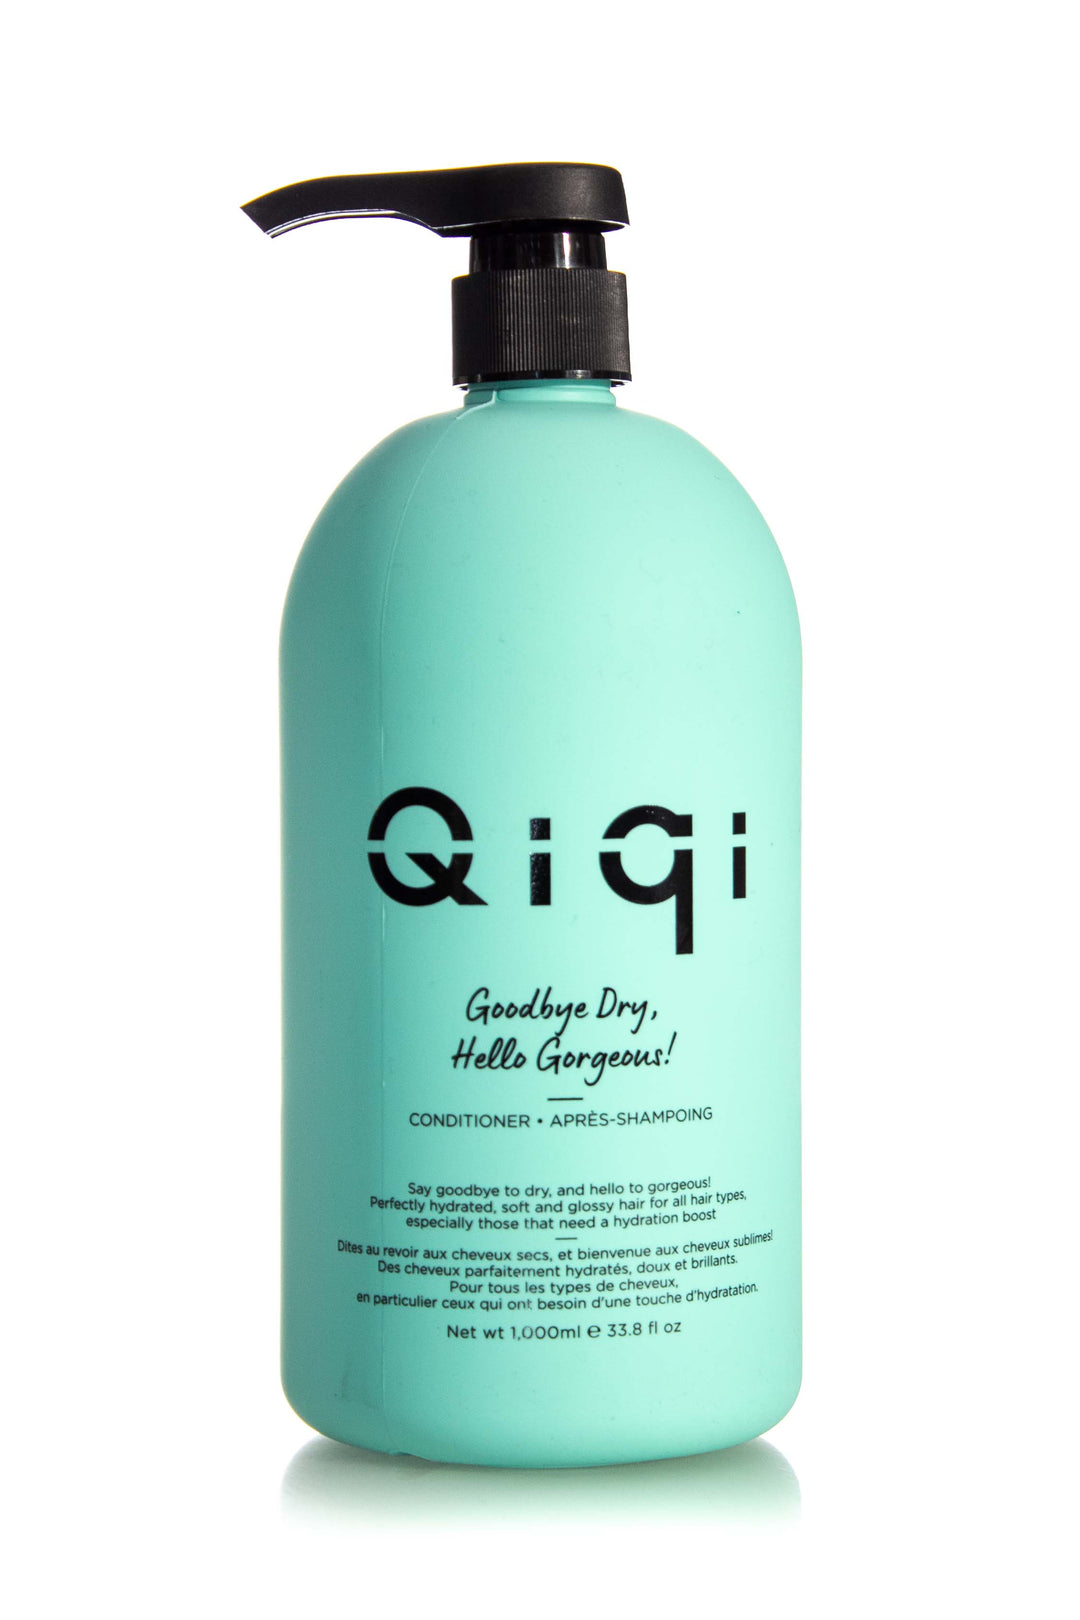 QIQI GOODBYE DRY, HELLO GORGEOUS! CONDITIONER 1L